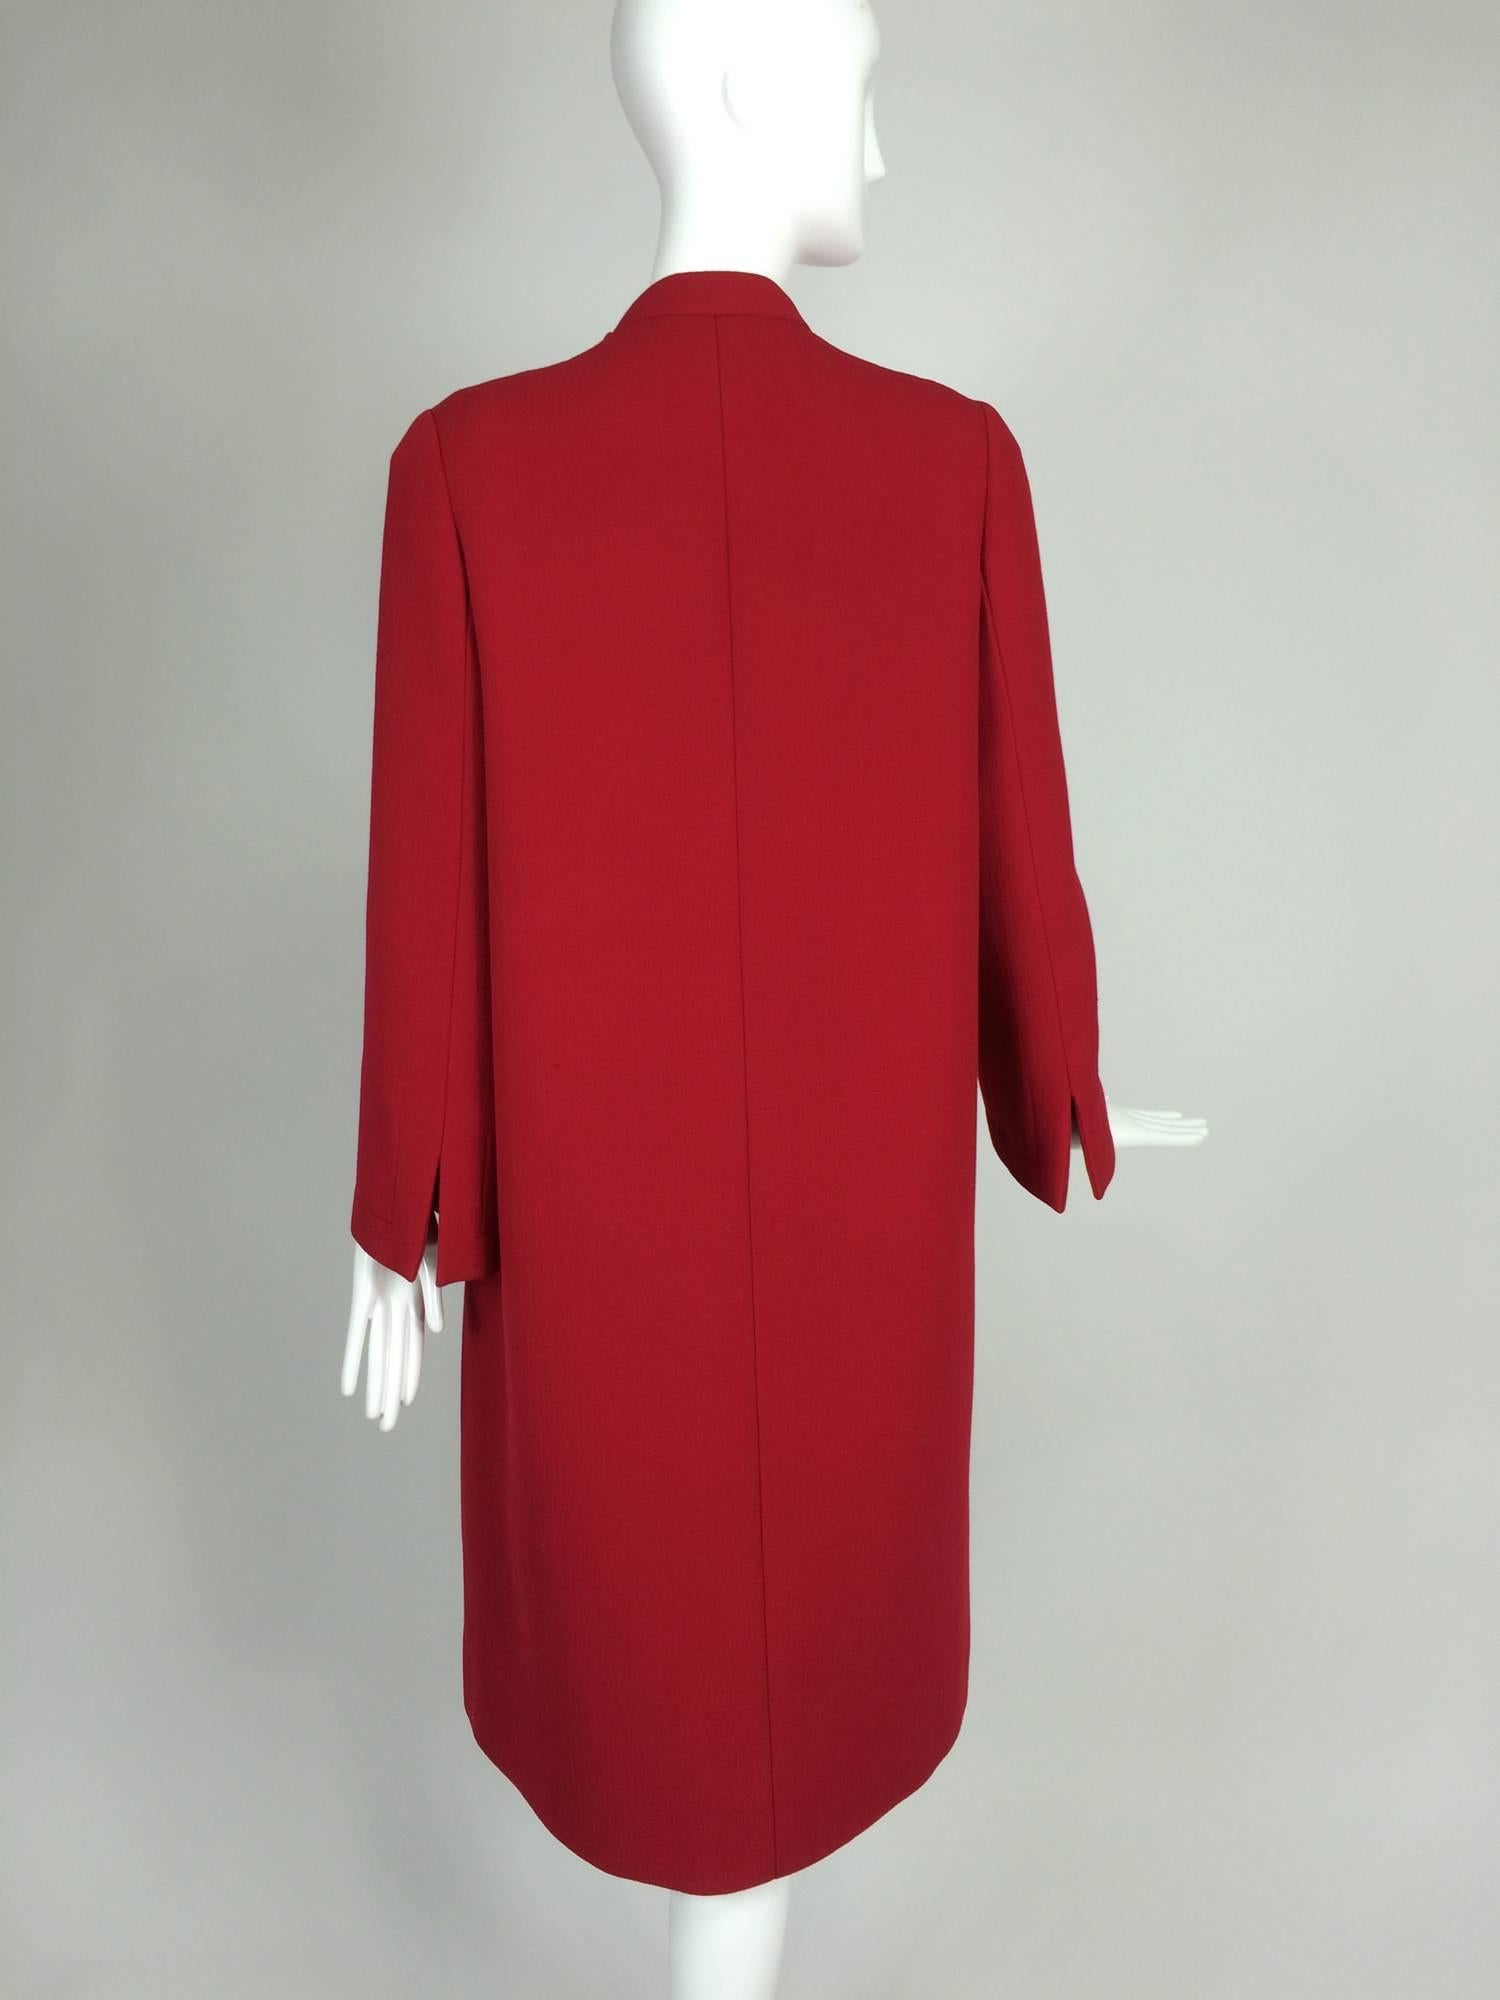 Pauline Trigere chic cherry red wool open front coat 1950s 3